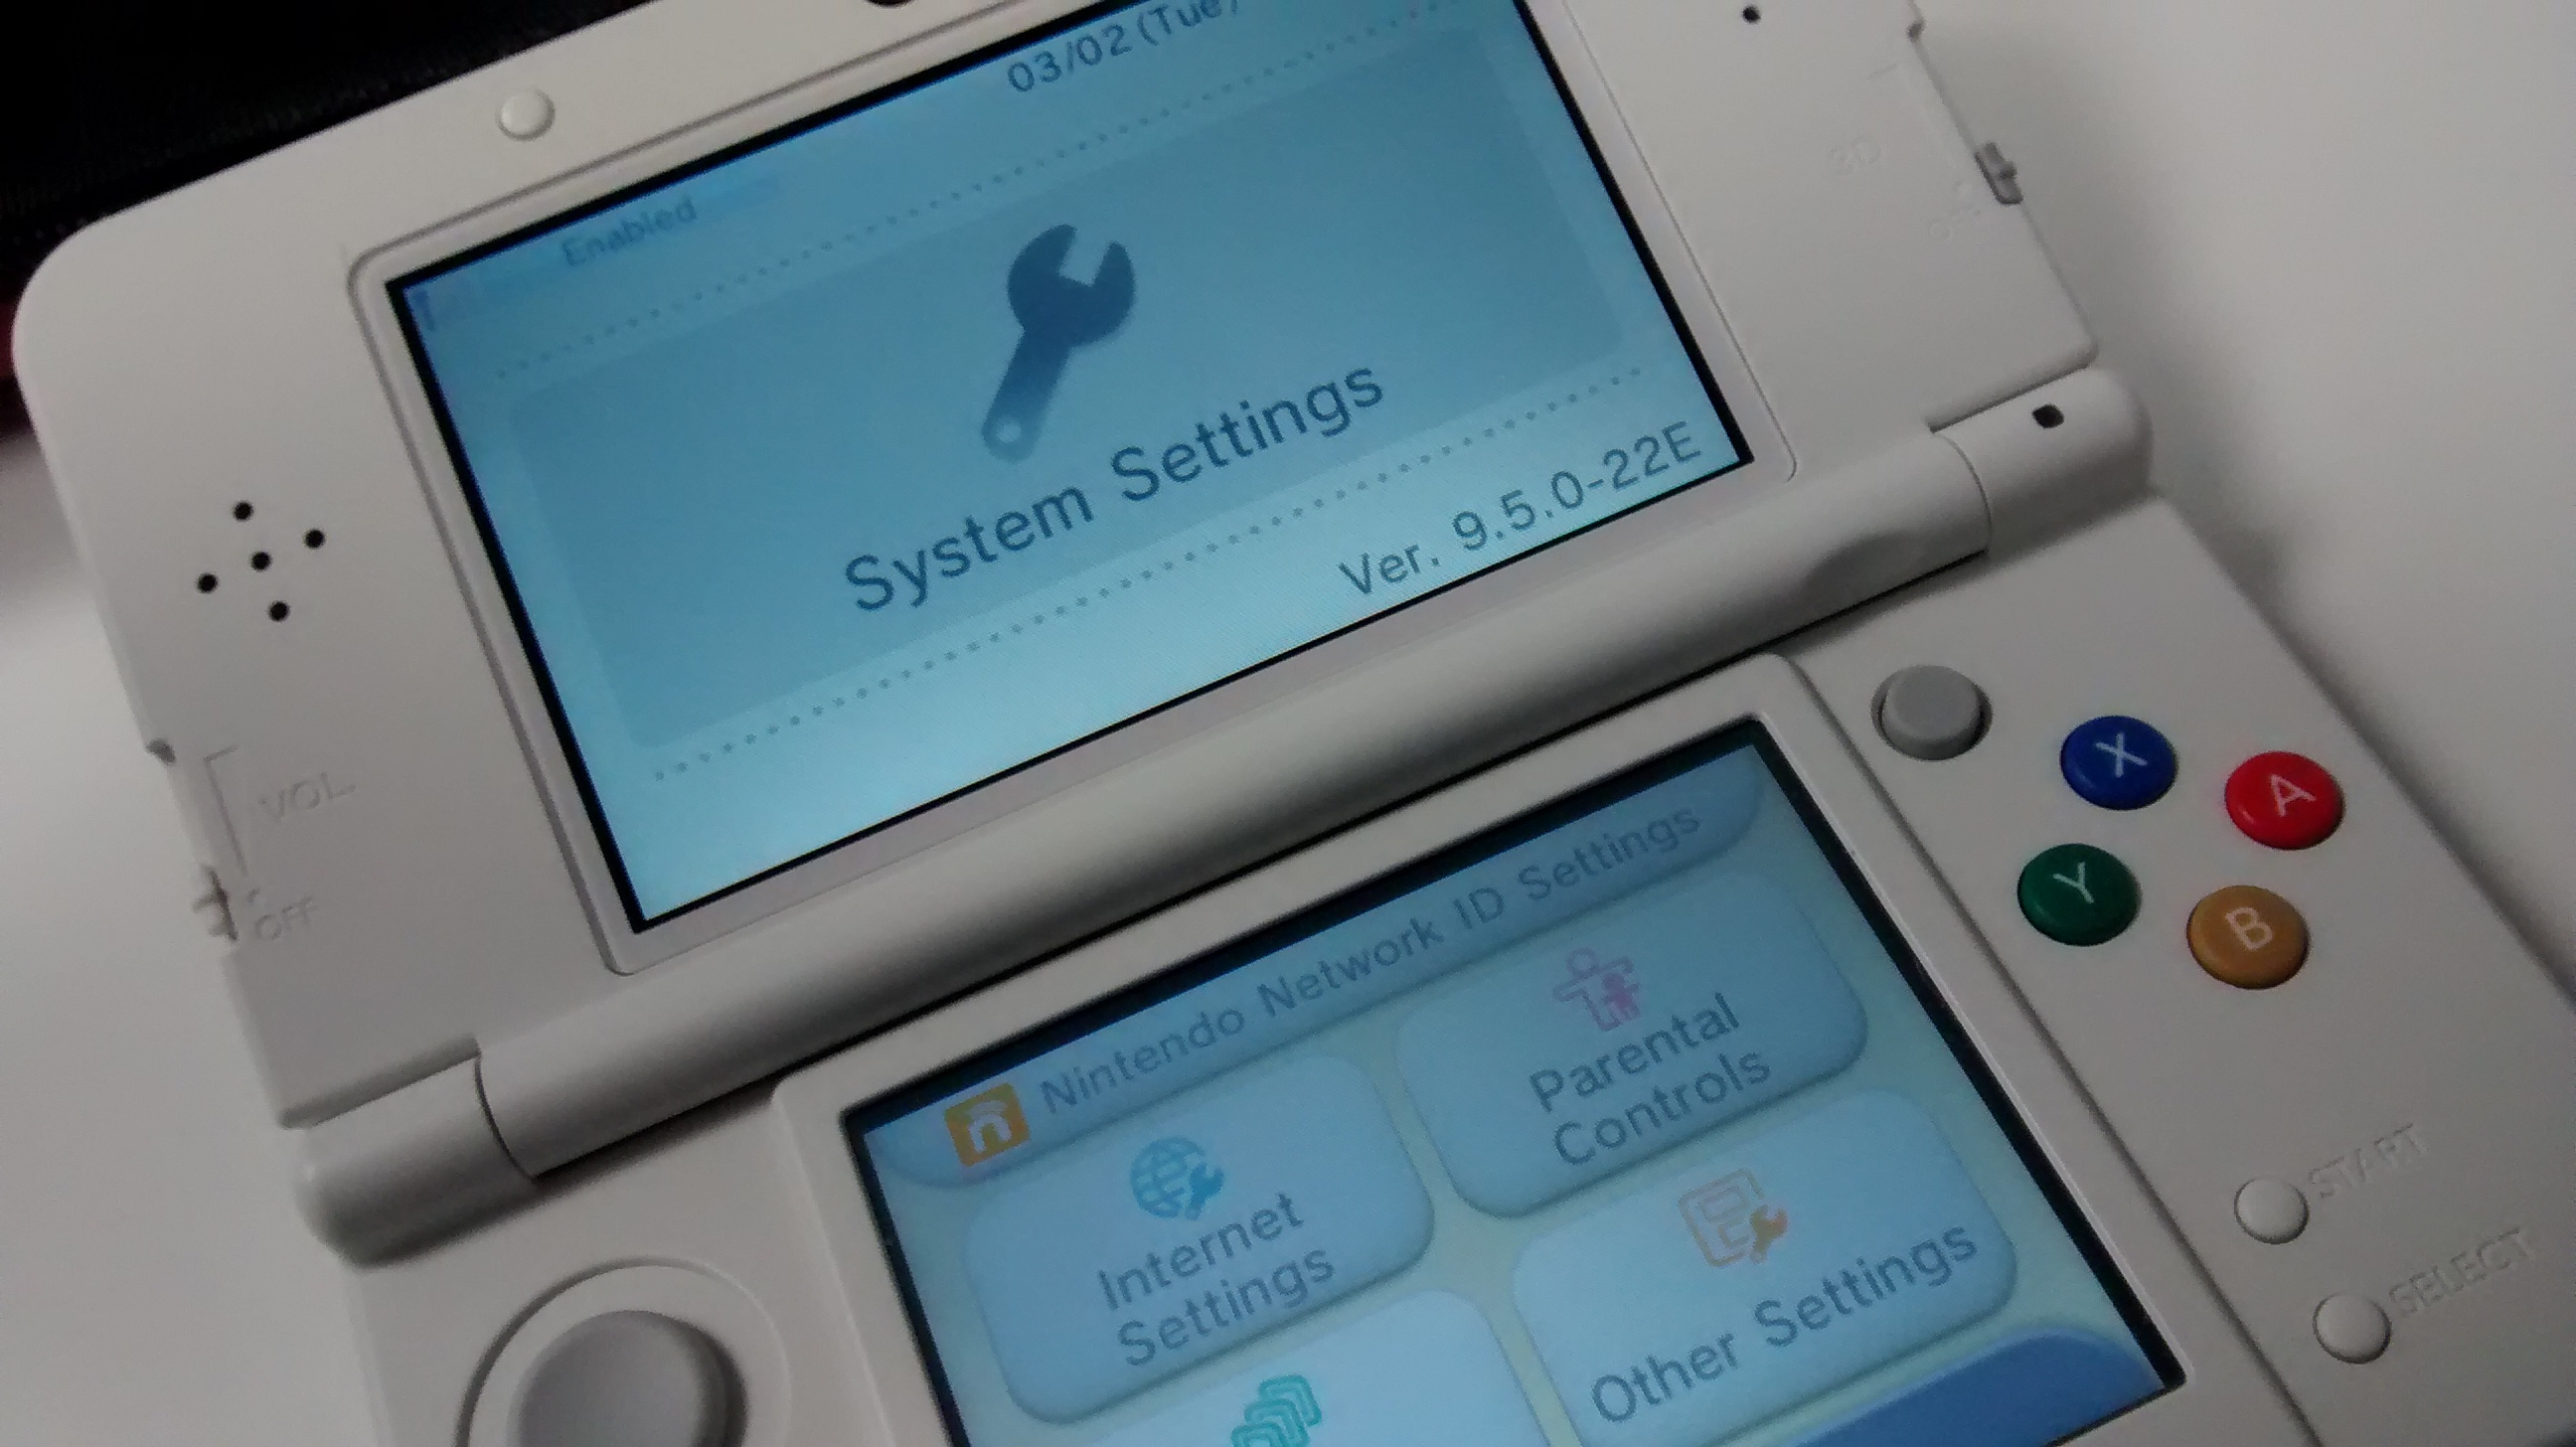 Nintendo S Stability 3ds Update 9 5 0 22 Takes On Gateway Flashcard Nintendo Life